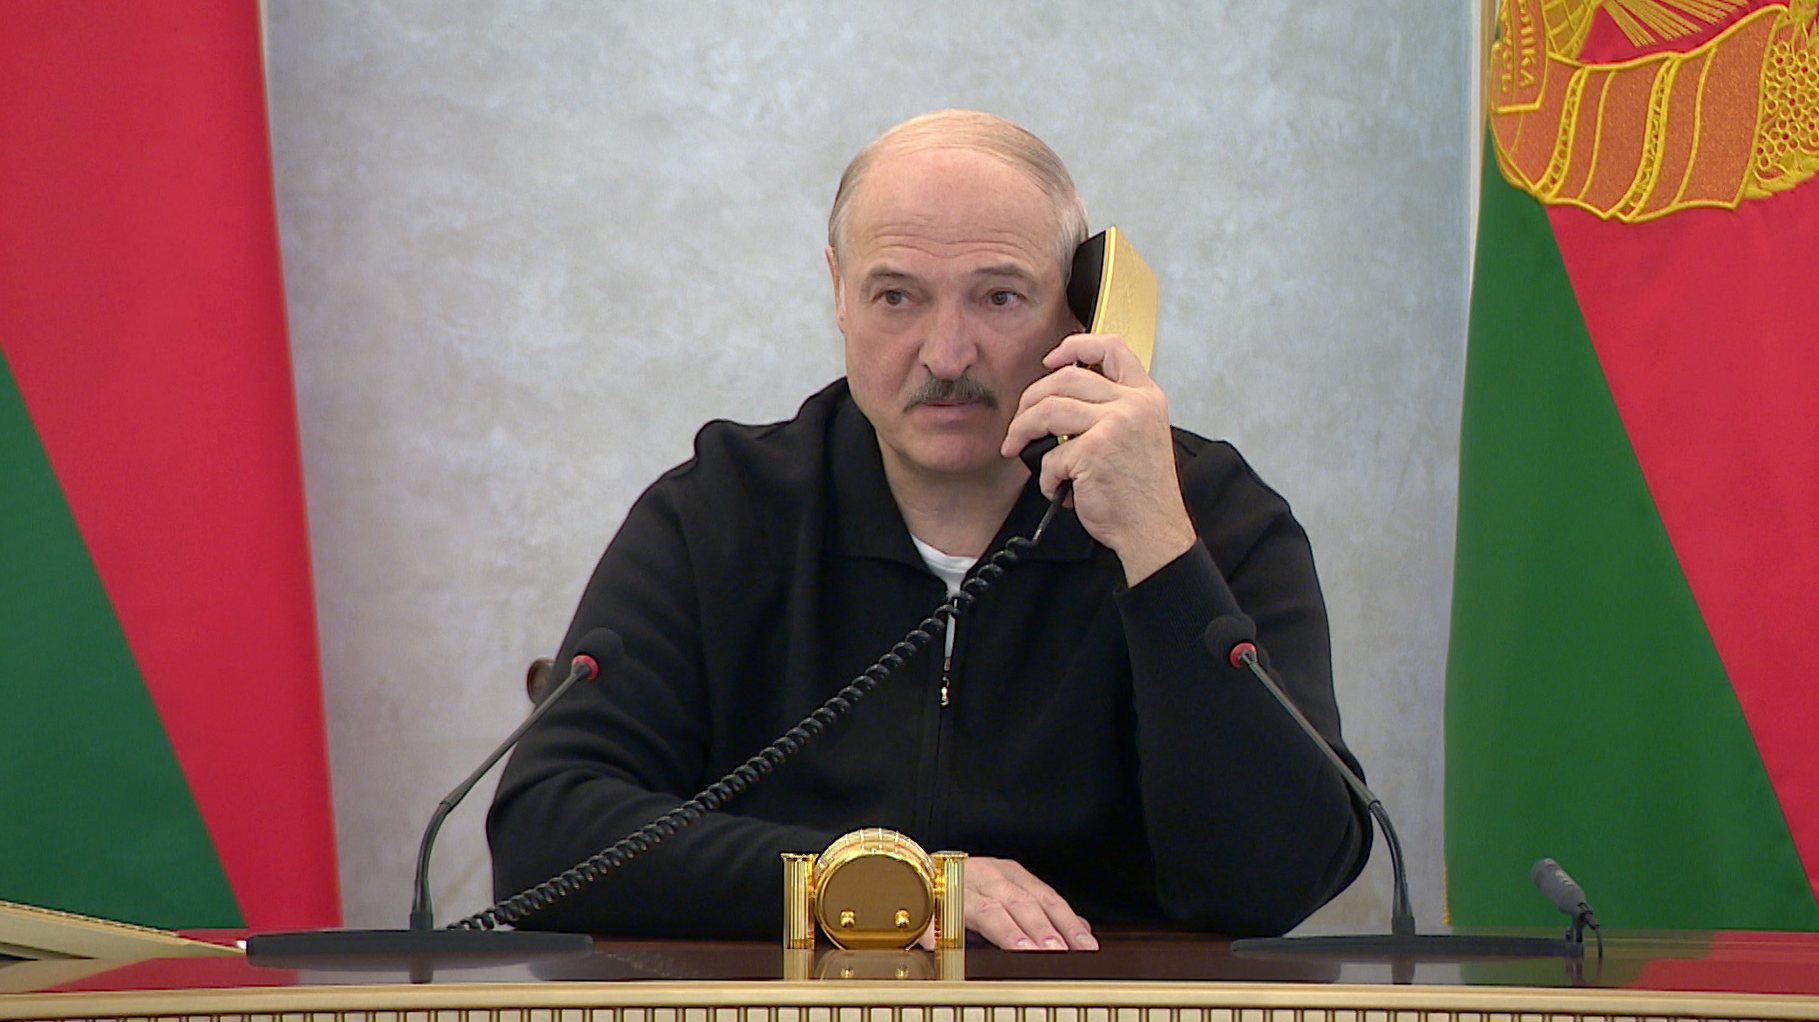 epa08622634 Belarusian President Alexander Lukashenko speaks on the phone at the Palace of Independence in Minsk, Belarus, 23 August 2020 (Issued 24 August 2020).  EPA/BELTA / POOL